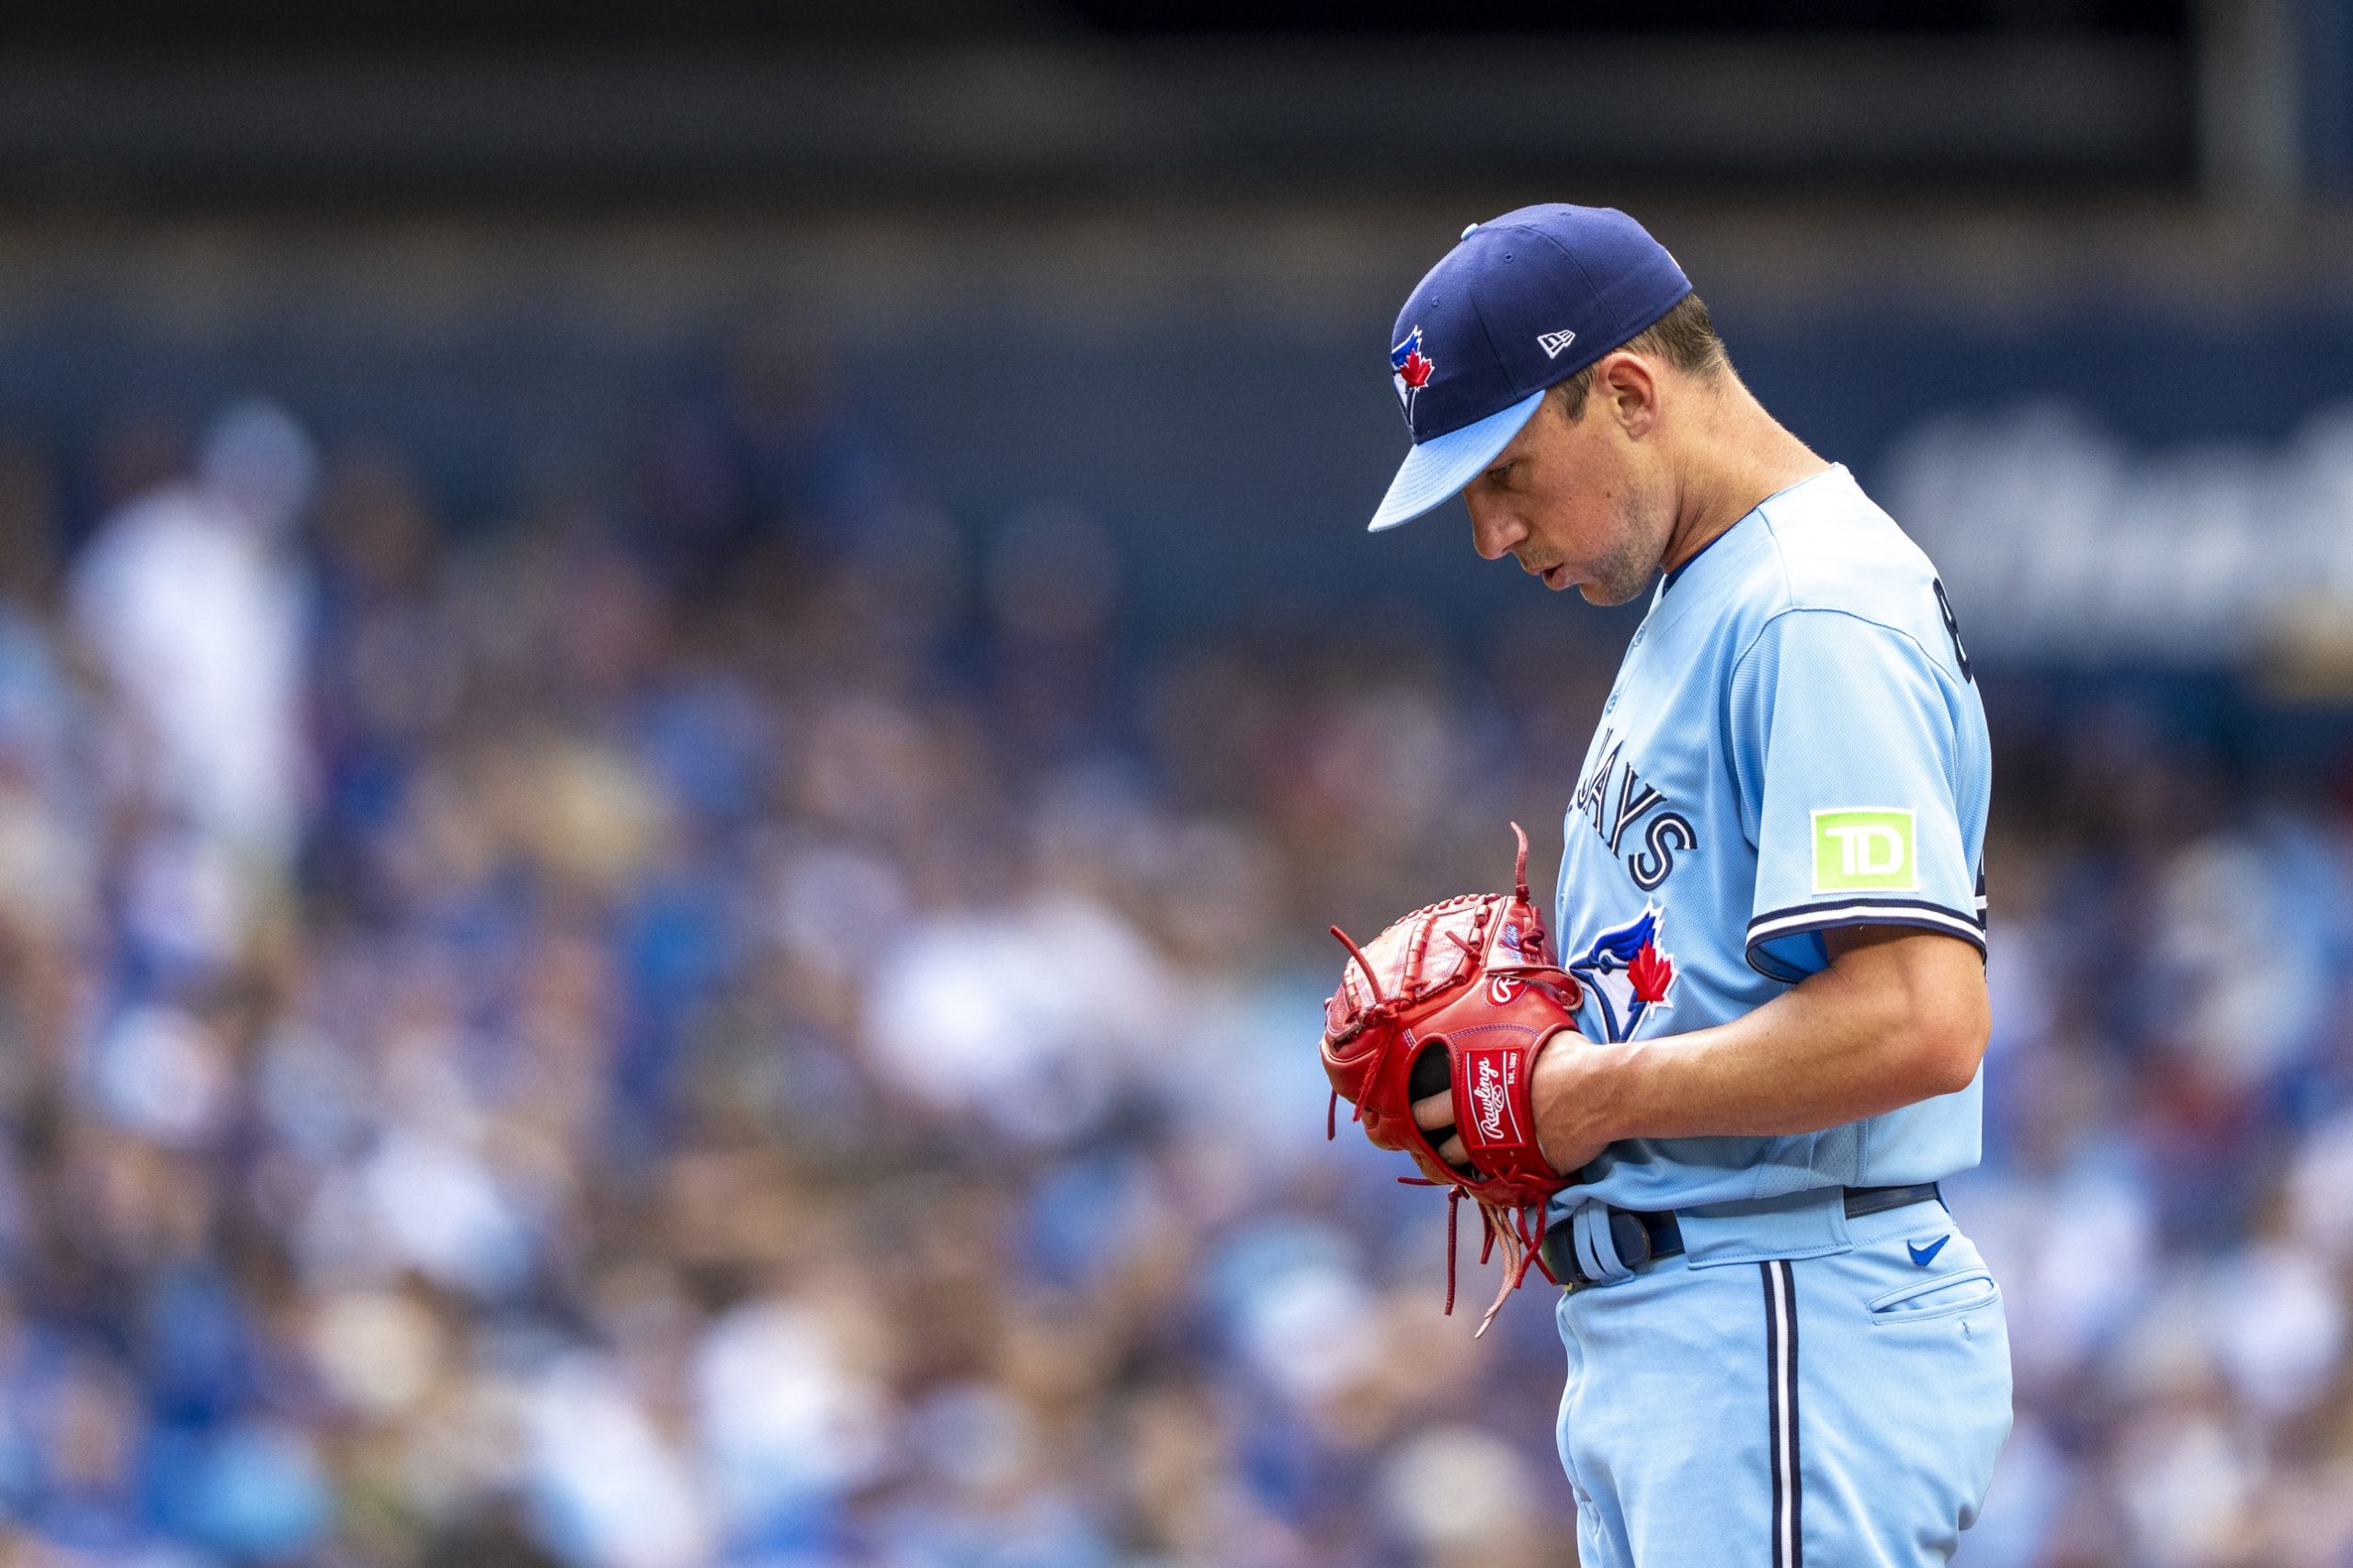 Blue Jays: Where They Stand in the AL East After Acquiring Daulton